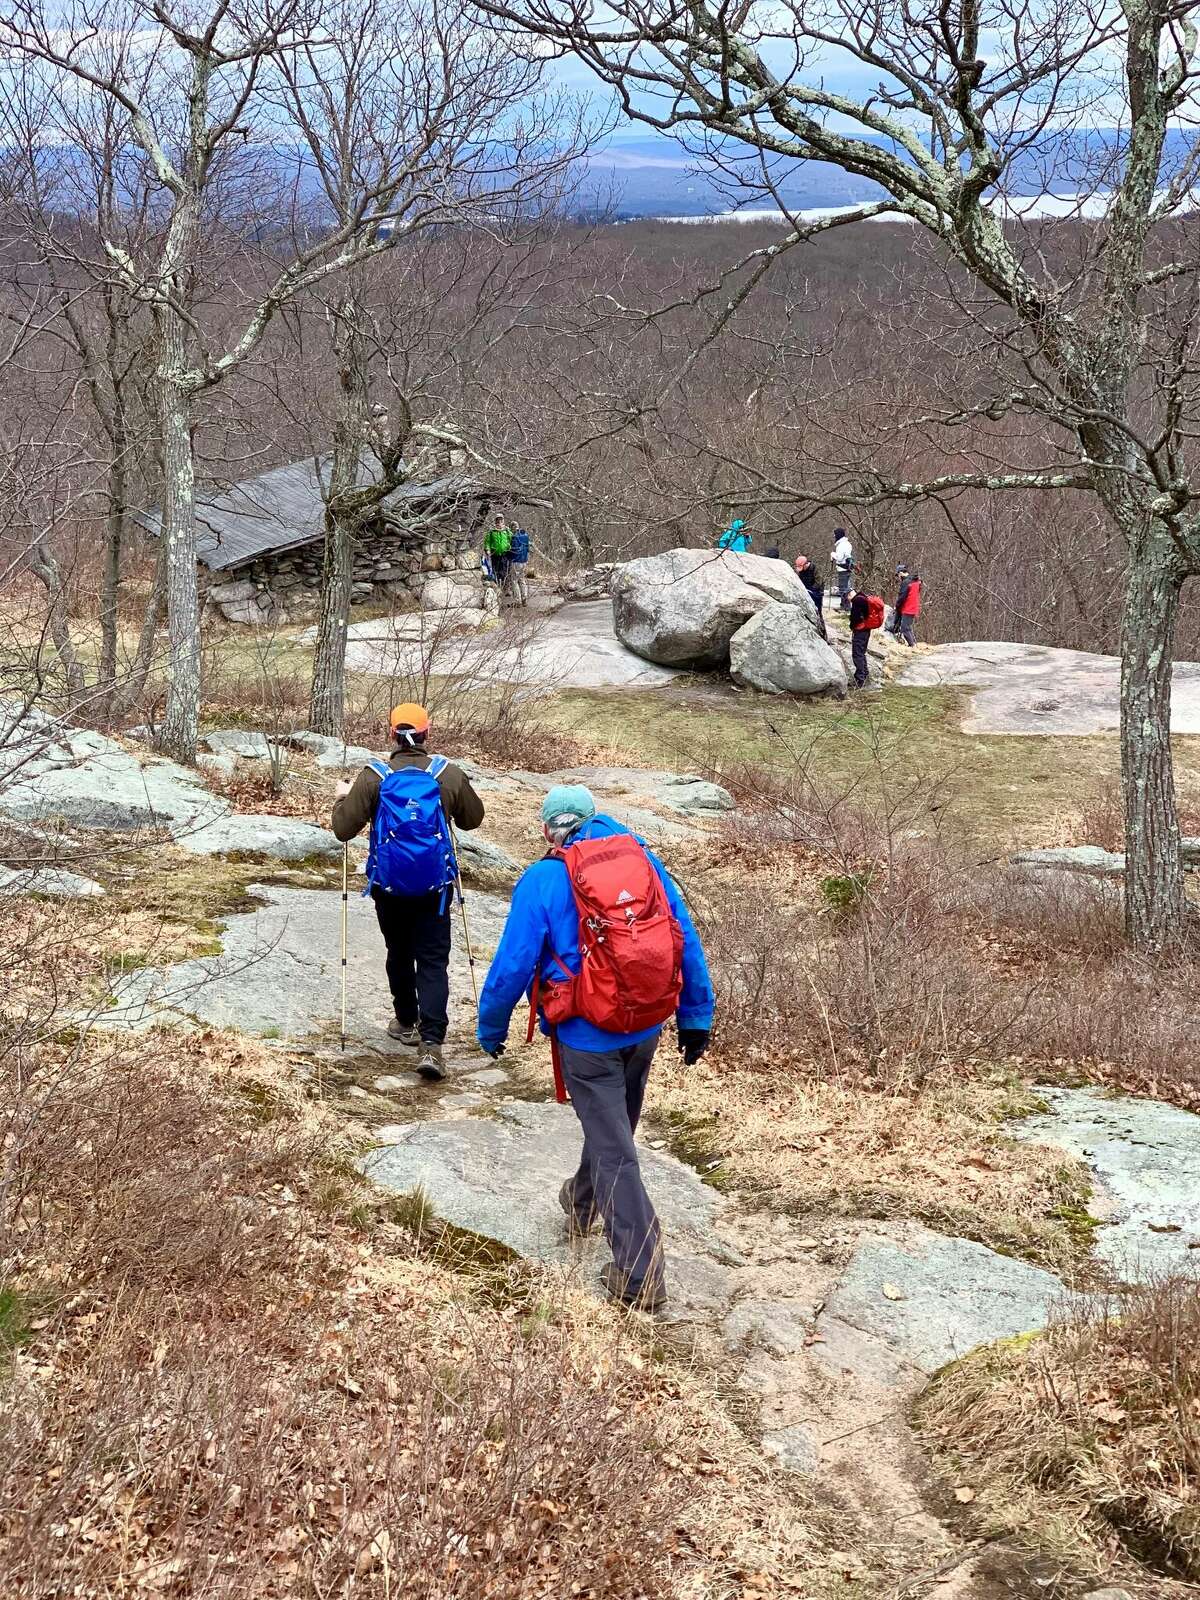 Harriman State Park is the second largest state park in New York with more than 200 hiking trails and several campgrounds for campers of all experience levels.